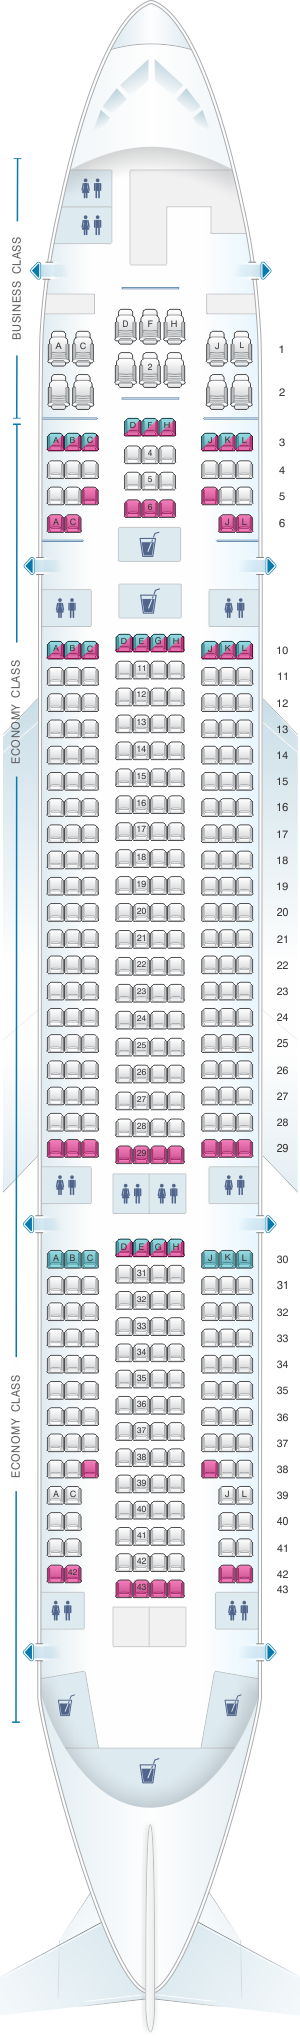 Seat map for Rossiya Airlines Boeing B777 200ER